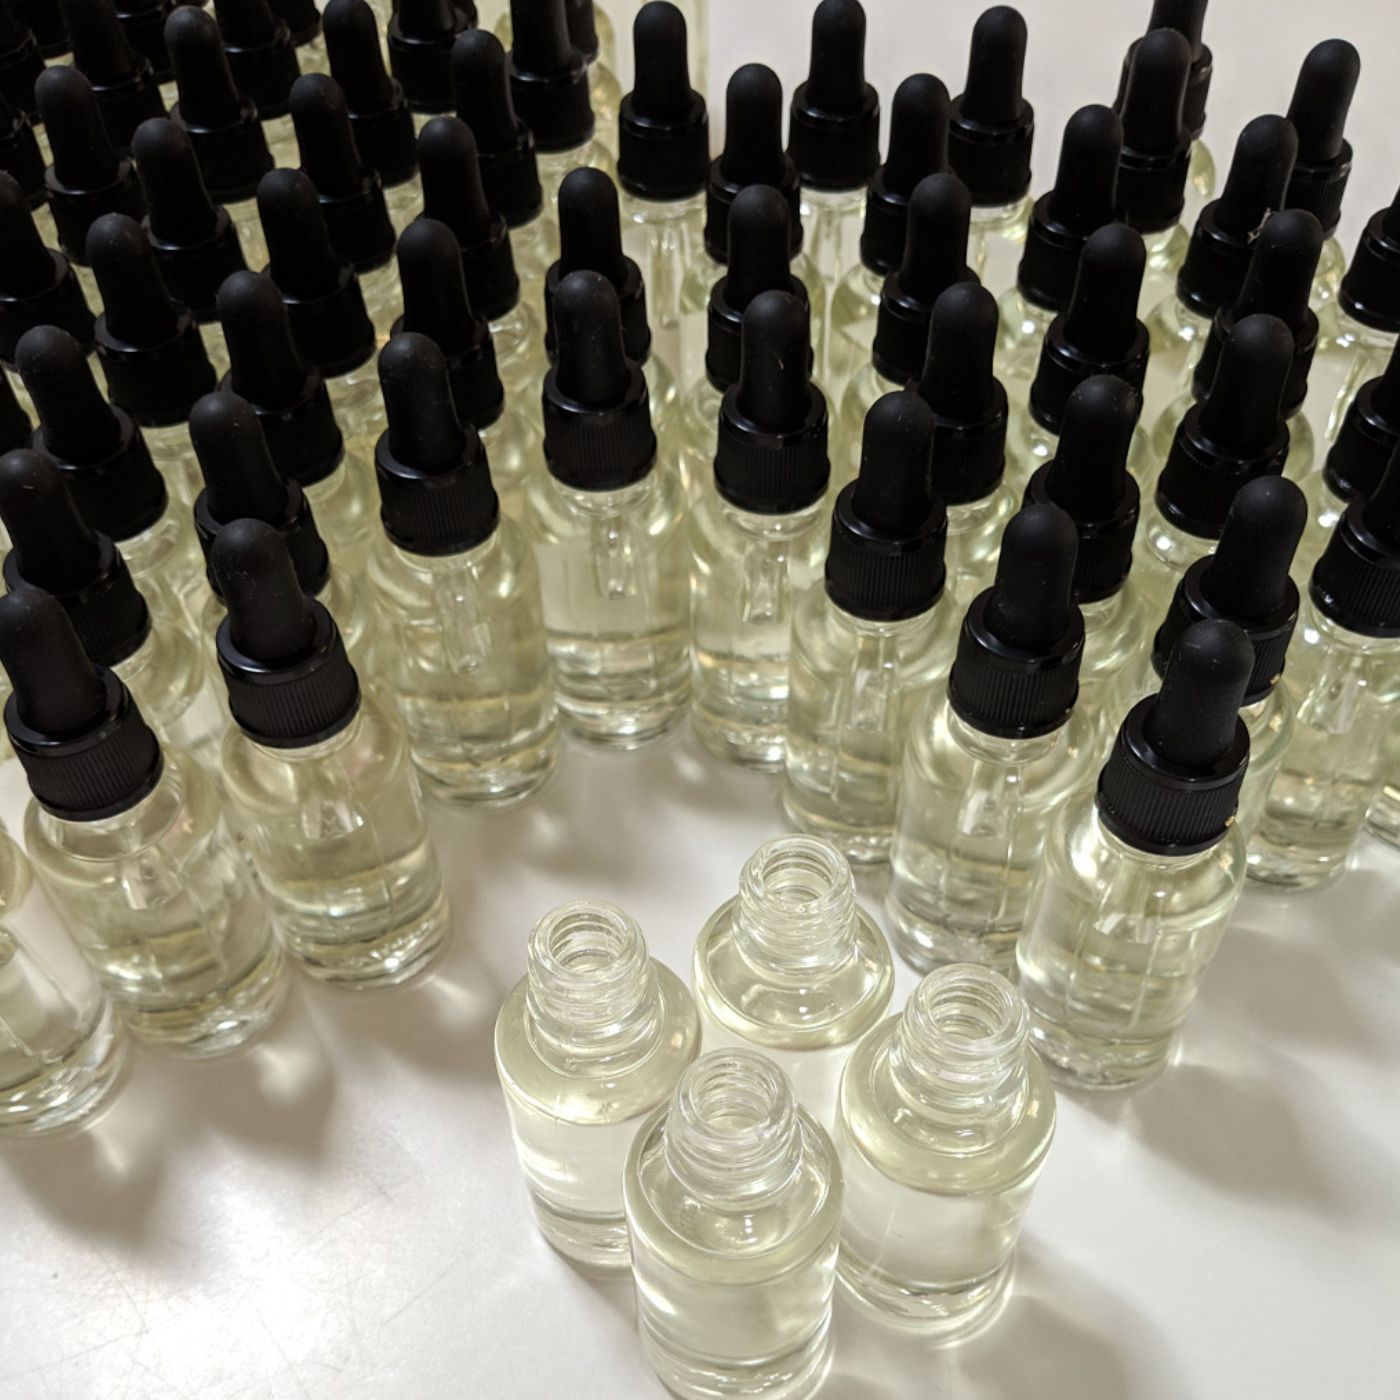 How to use your oil serum: Bright & Layer Once